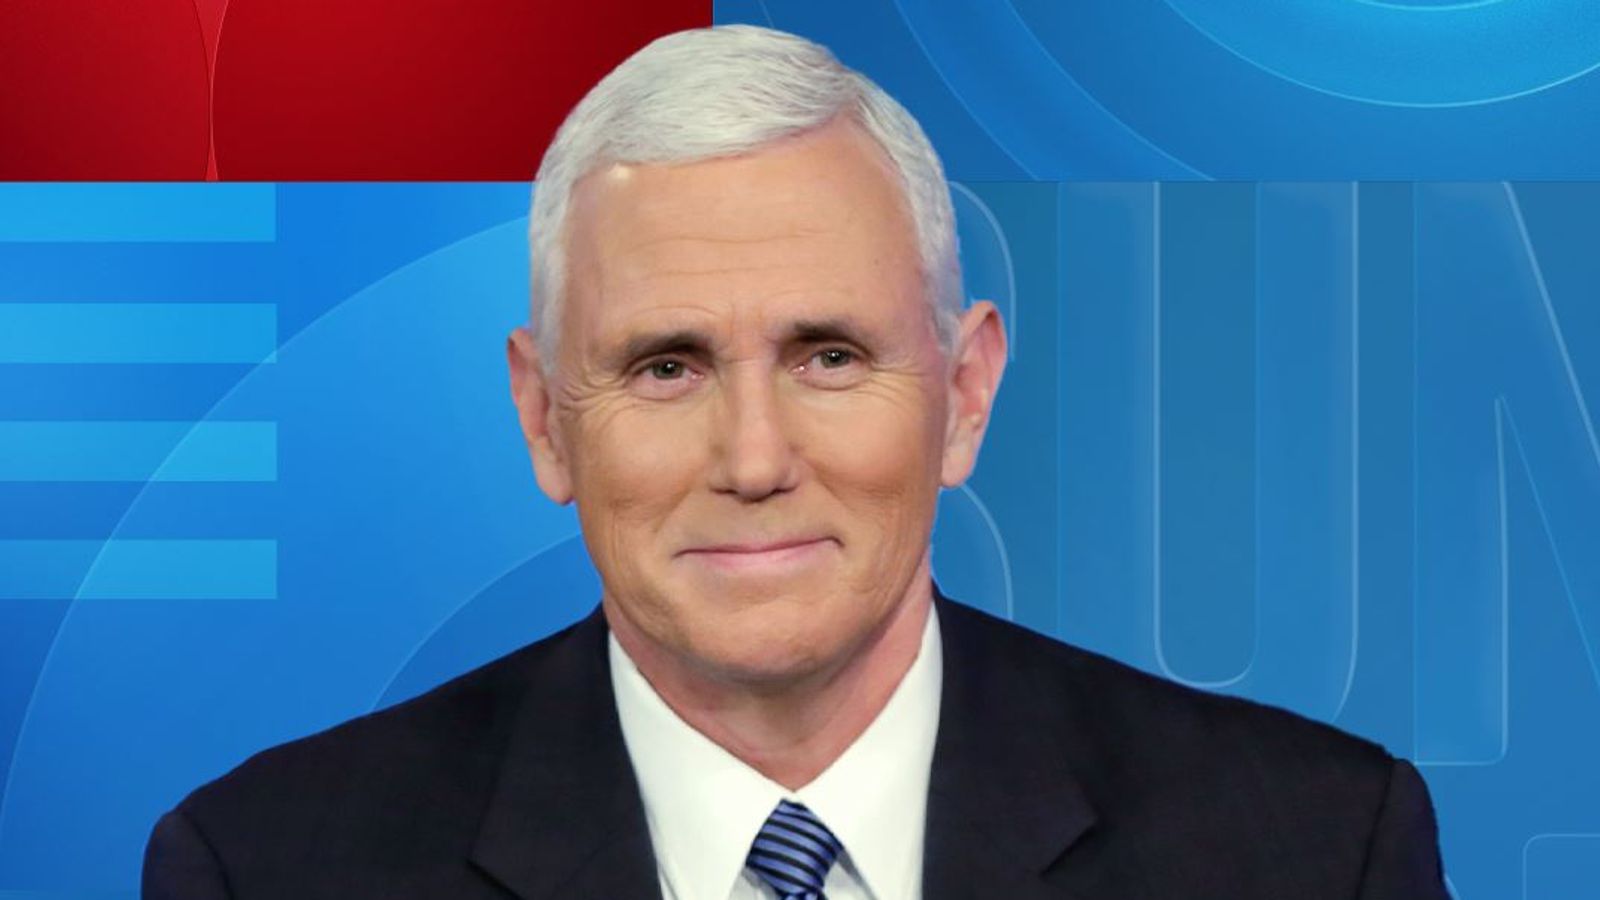 'Americans will rally around constitution': Mike Pence tells Sky News he has confidence in upcoming election process